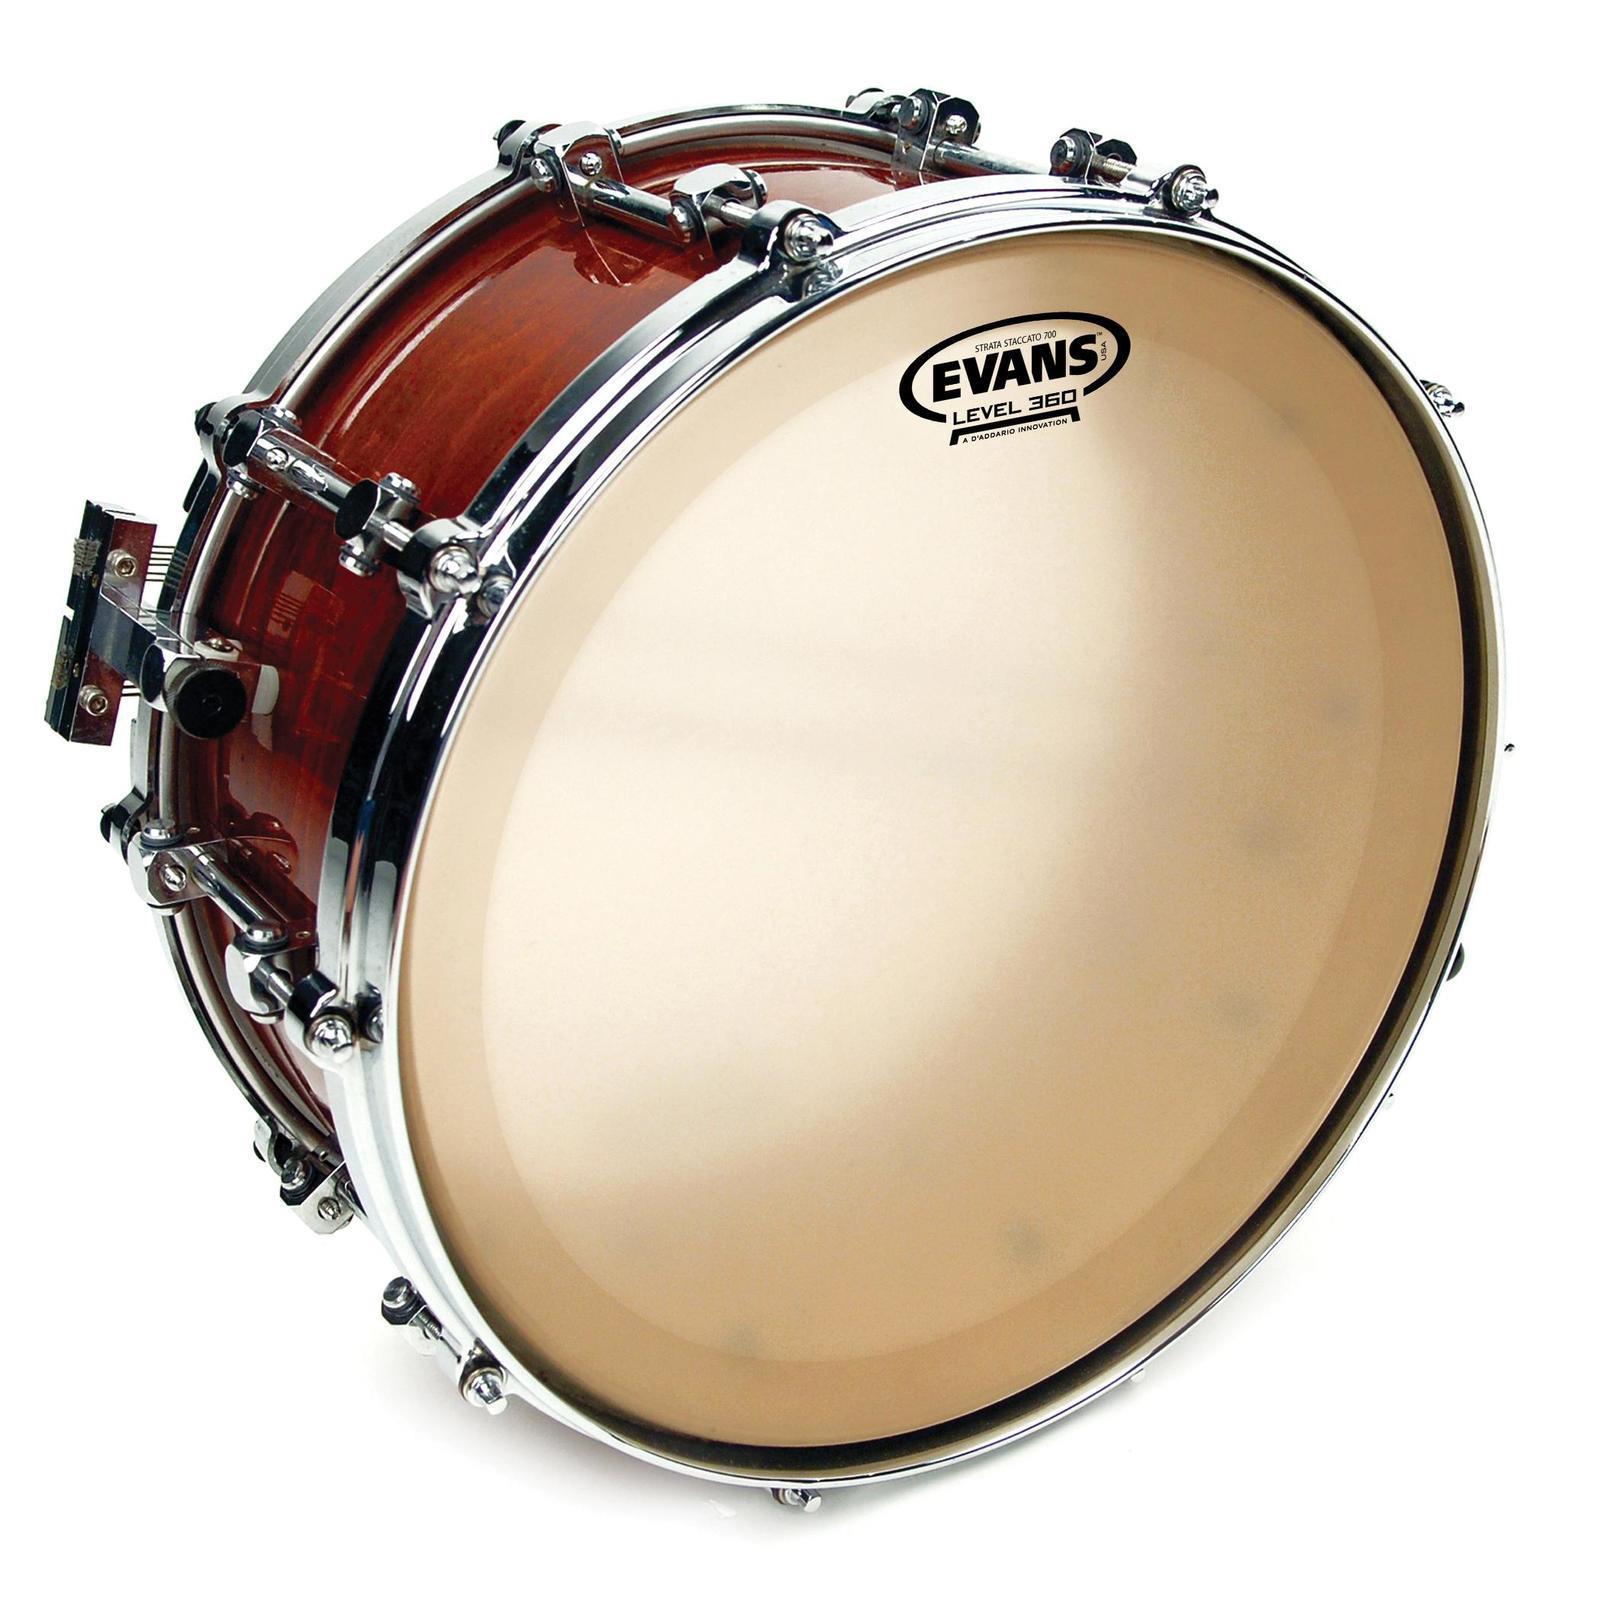 Evans Strata Staccato 700 Concert Snare Drum Head, 14 Inch *SKIN ONLY*